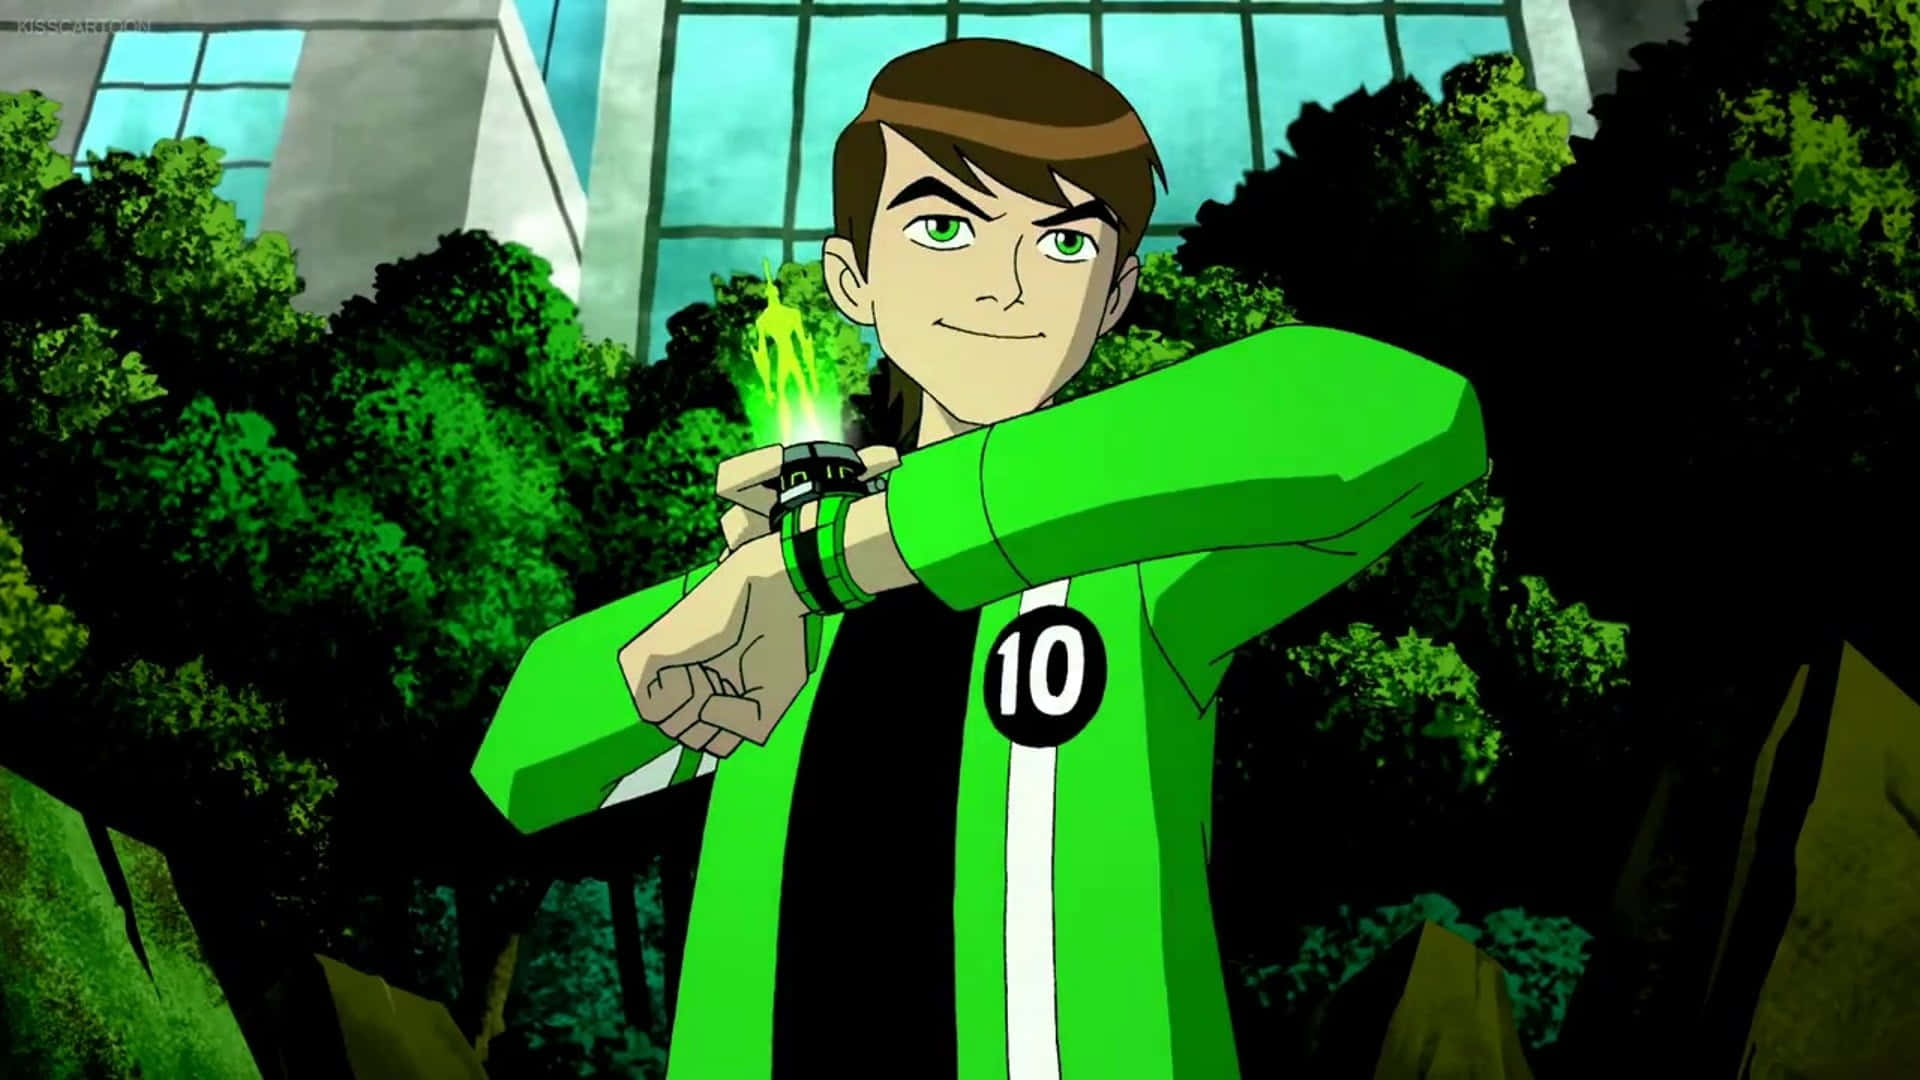 Exciting action-packed moment with Ben 10 morphing into his powerful alien superhero!